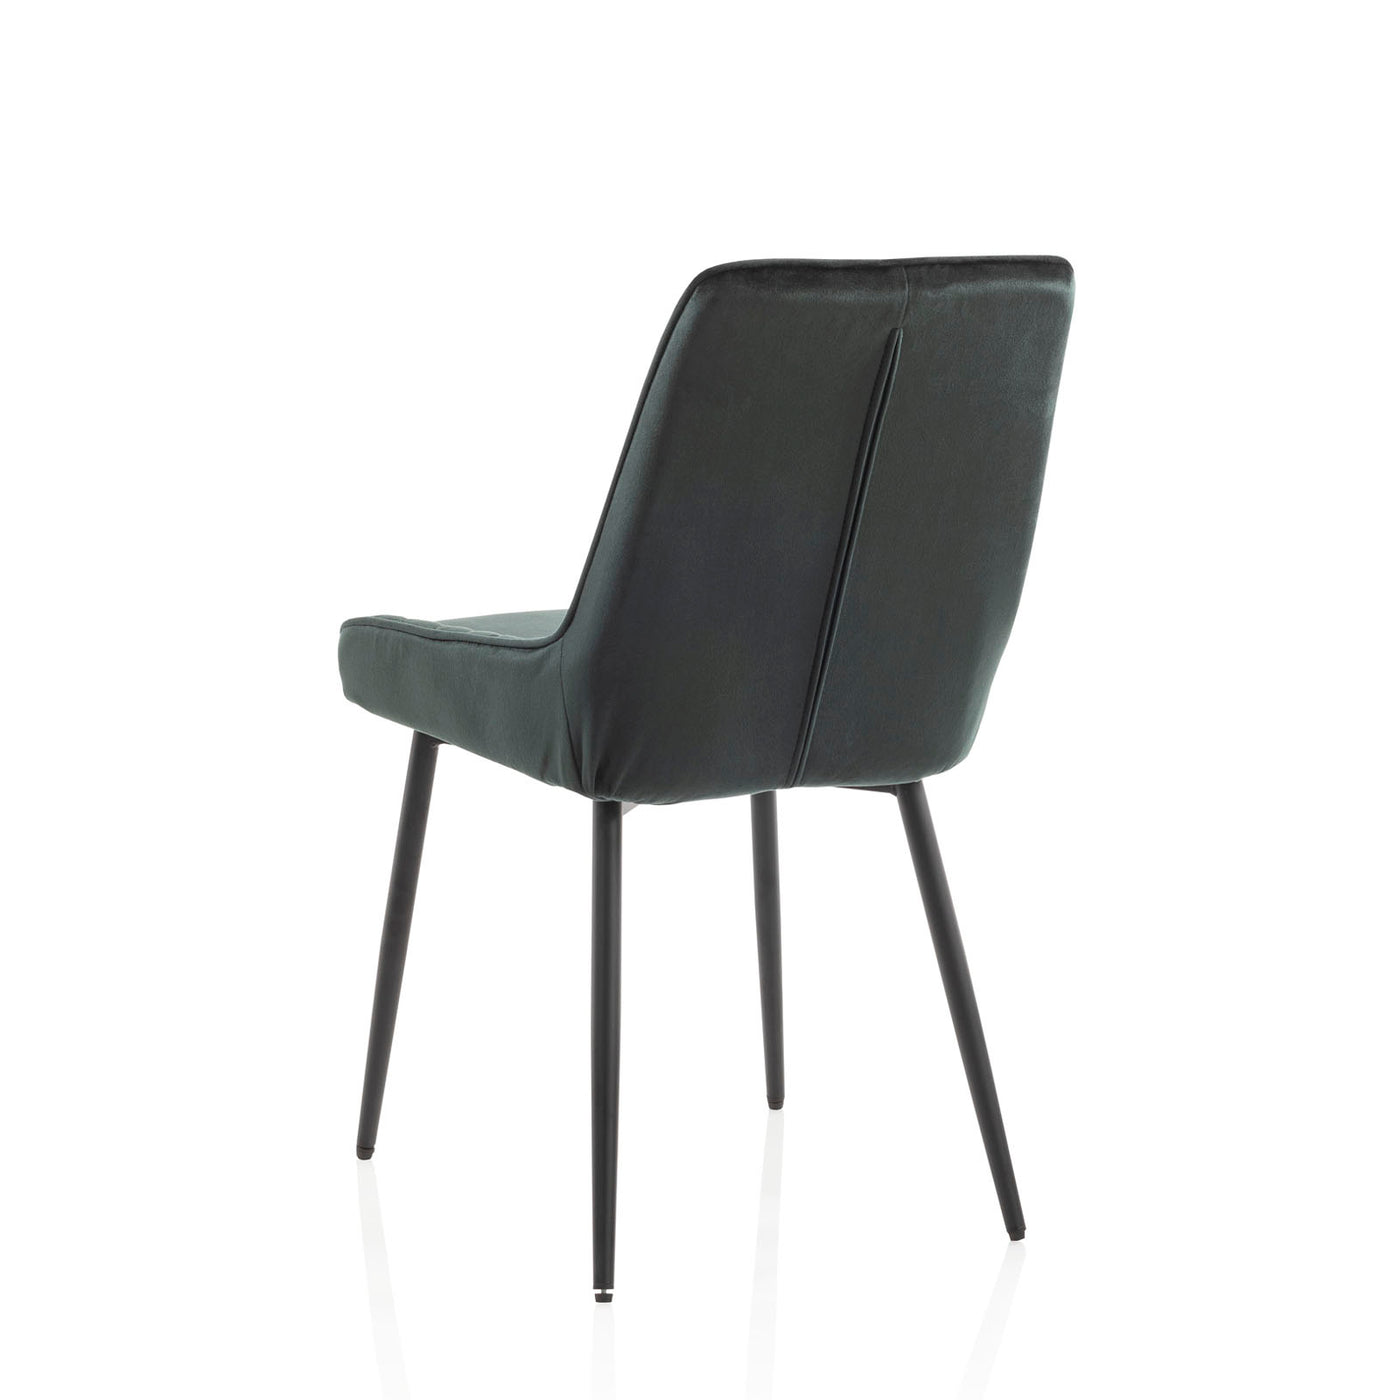 Set of 2 MOOI college green chairs